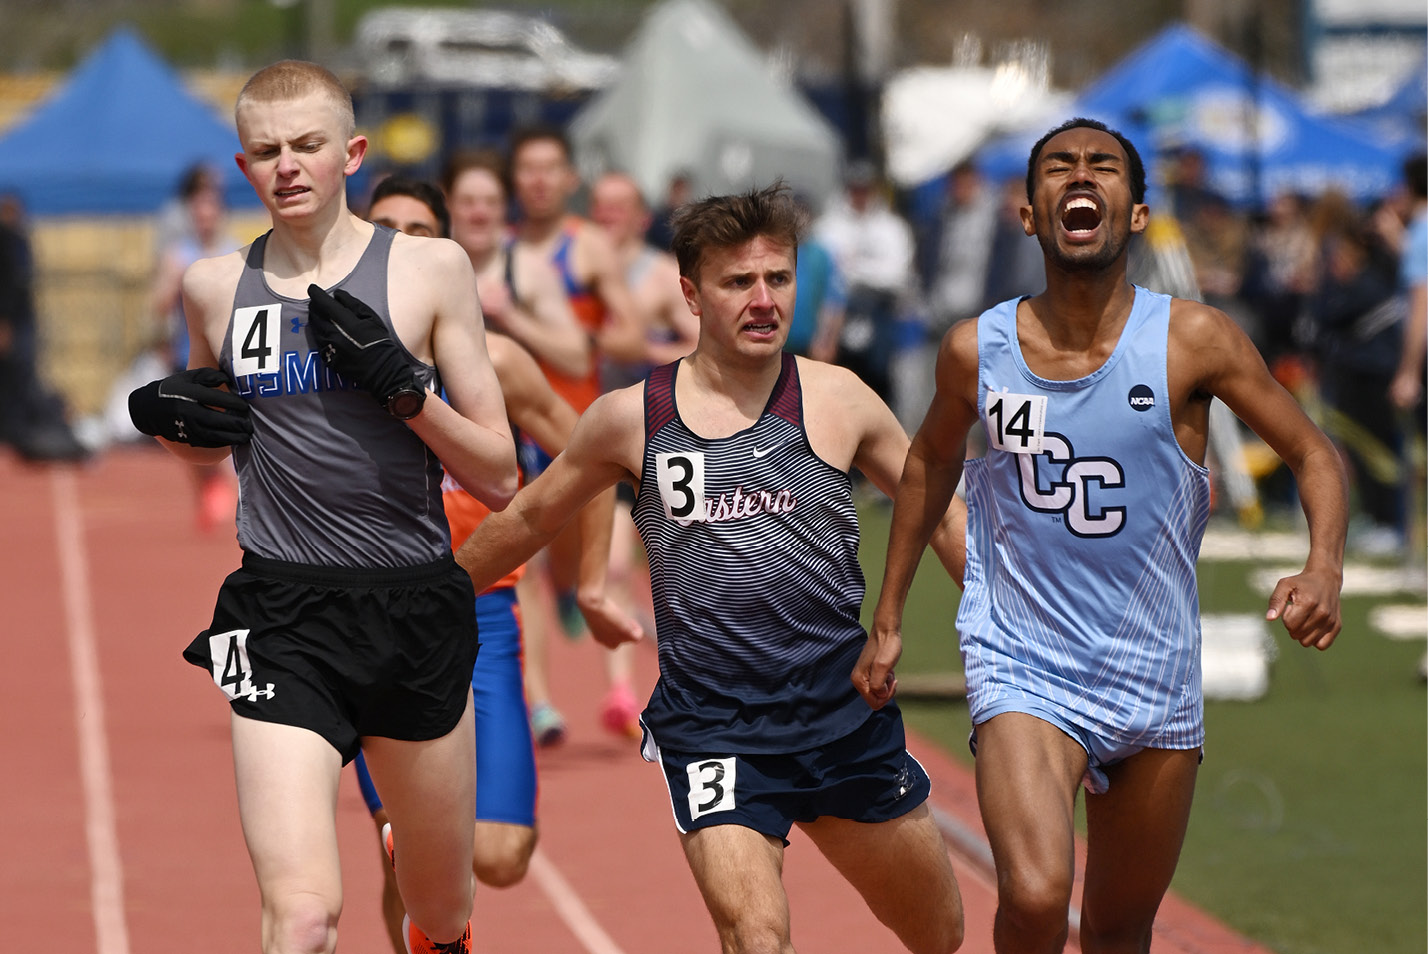 Conn College’s Jeffrey Love ’23 competes in the 1500m at the Coast Guard Invitational track meet Saturday, April 8, 2023 in New London.